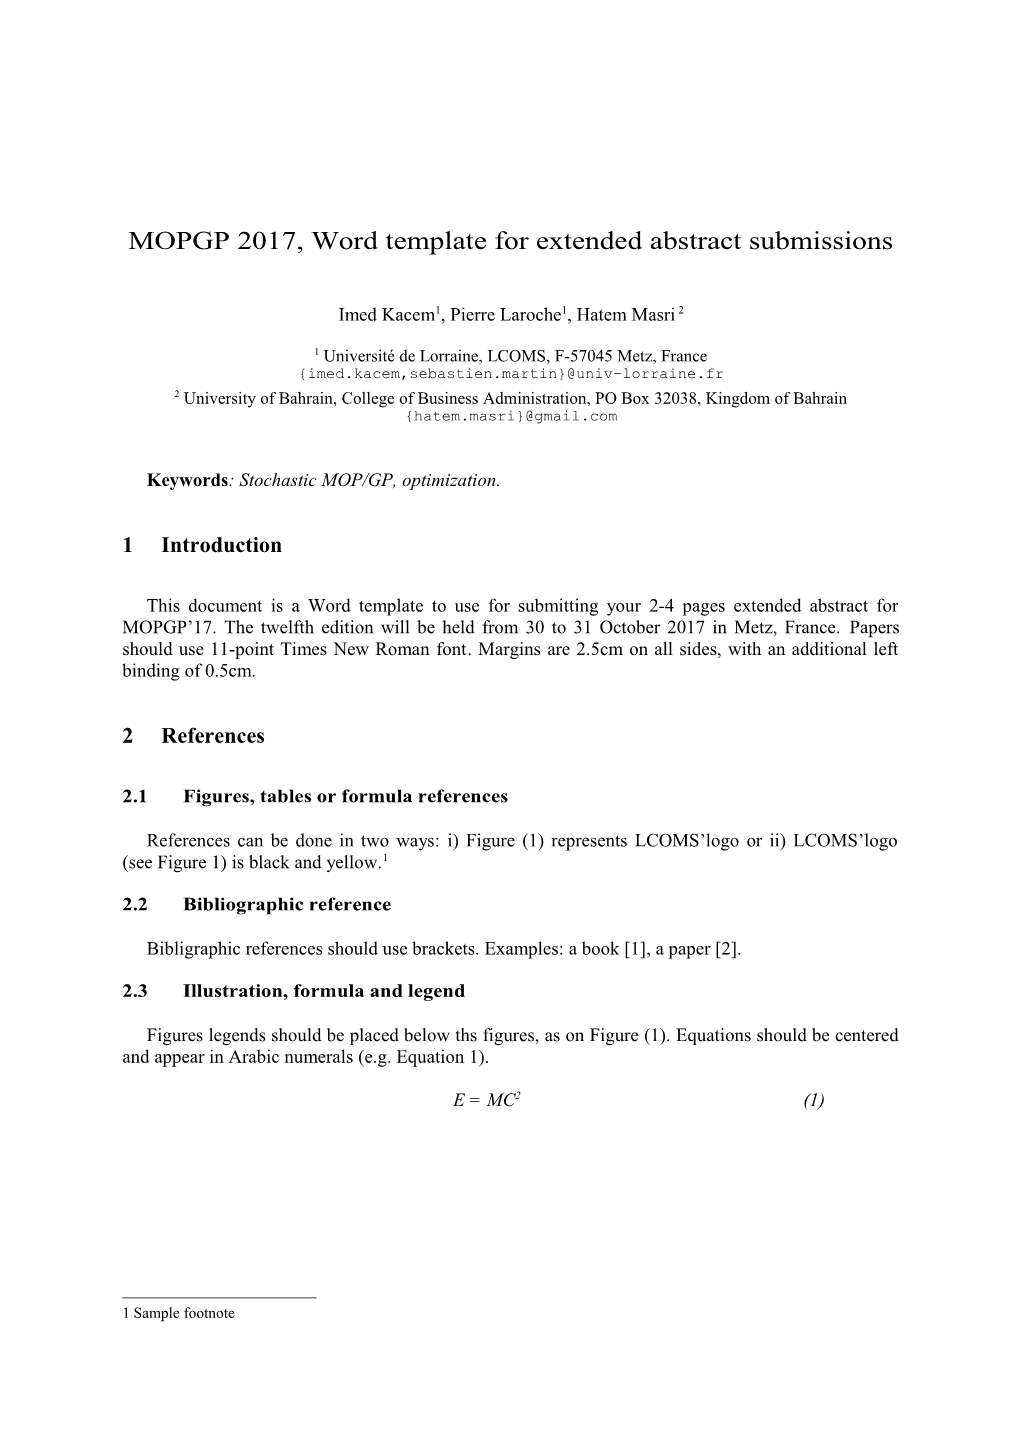 MOPGP 2017, Word Template for Extended Abstract Submissions